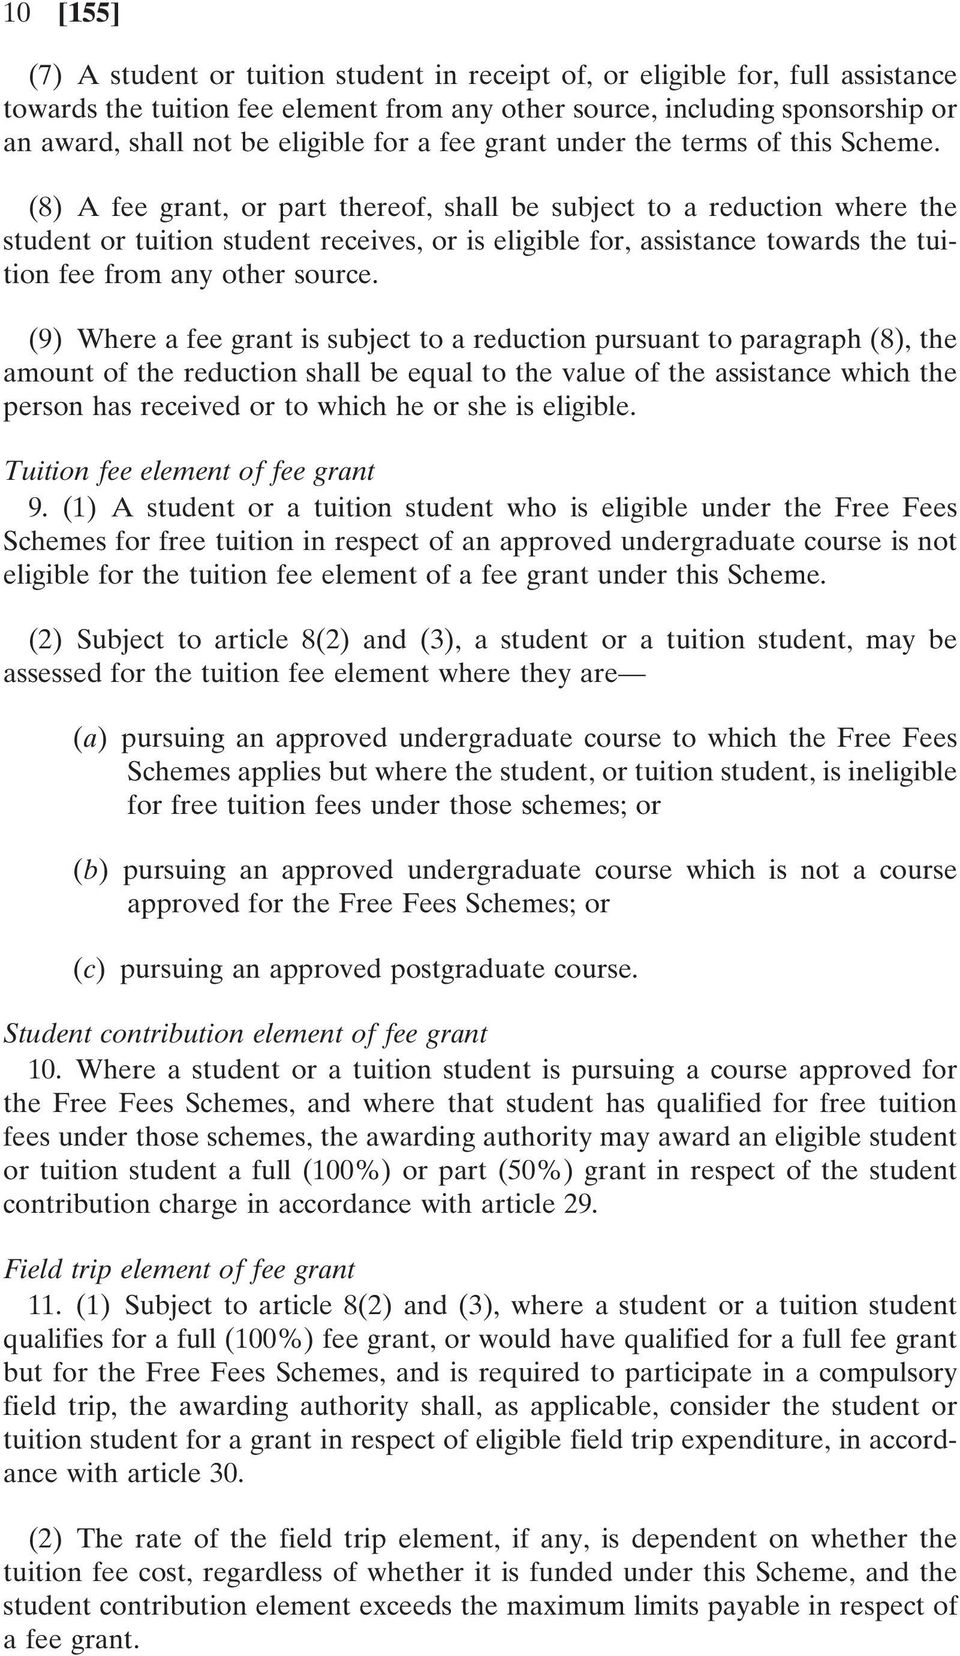 (8) A fee grant, or part thereof, shall be subject to a reduction where the student or tuition student receives, or is eligible for, assistance towards the tuition fee from any other source.